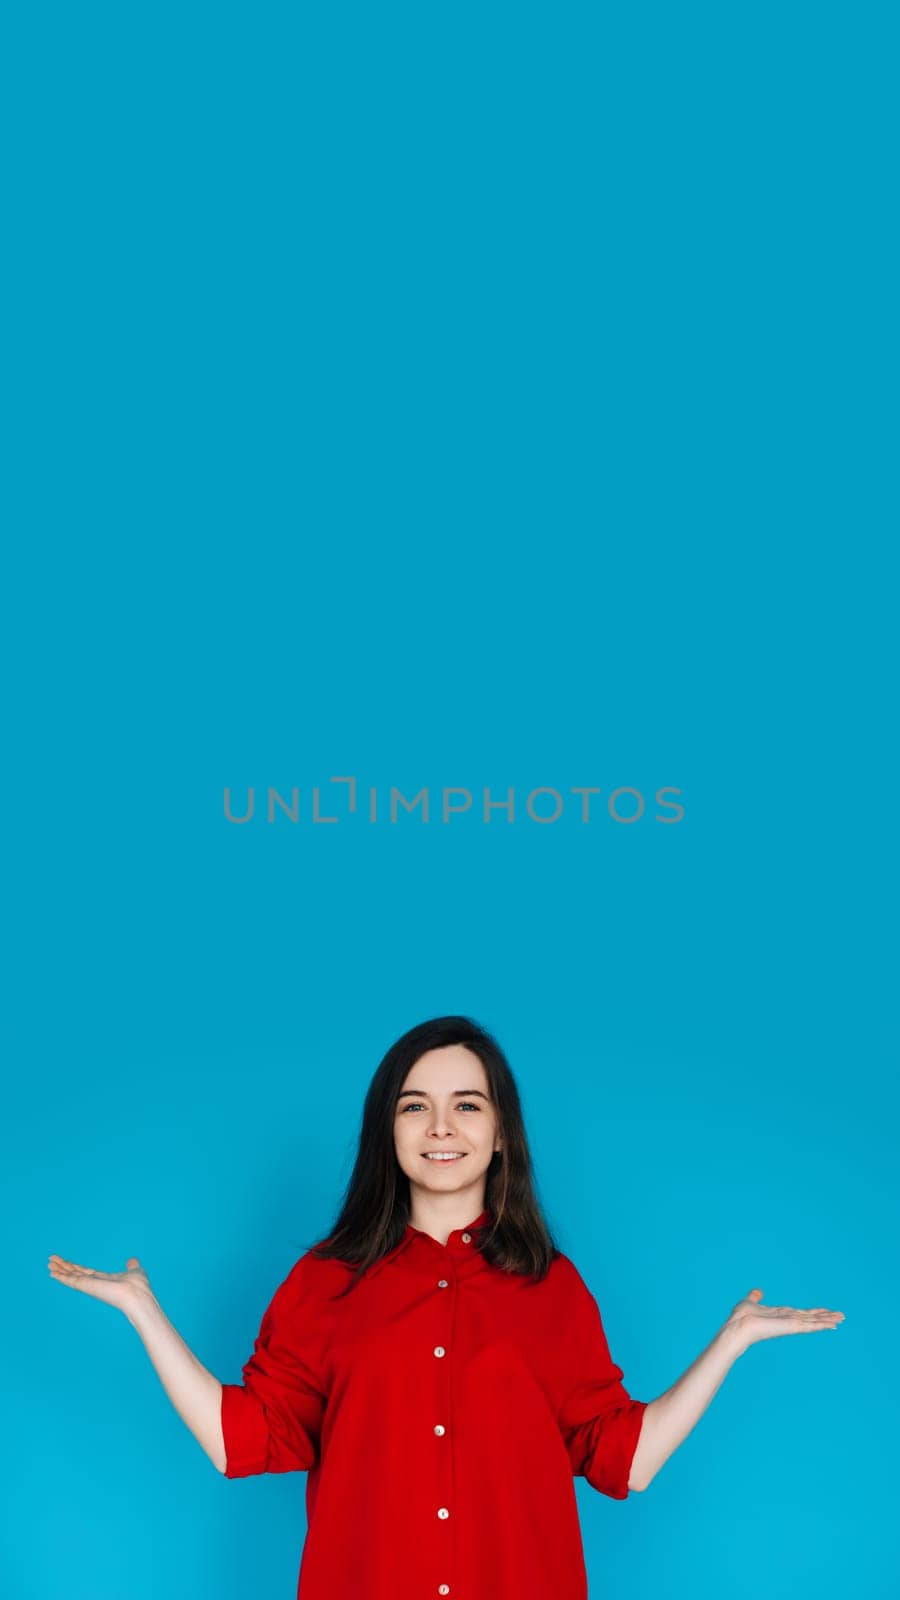 Young Woman Promoter Holding Hand Scales - Solutions, Comparisons, and Measurements - Advertising Concept - Isolated on Blue Background. Compare, Measure, and Advertise.